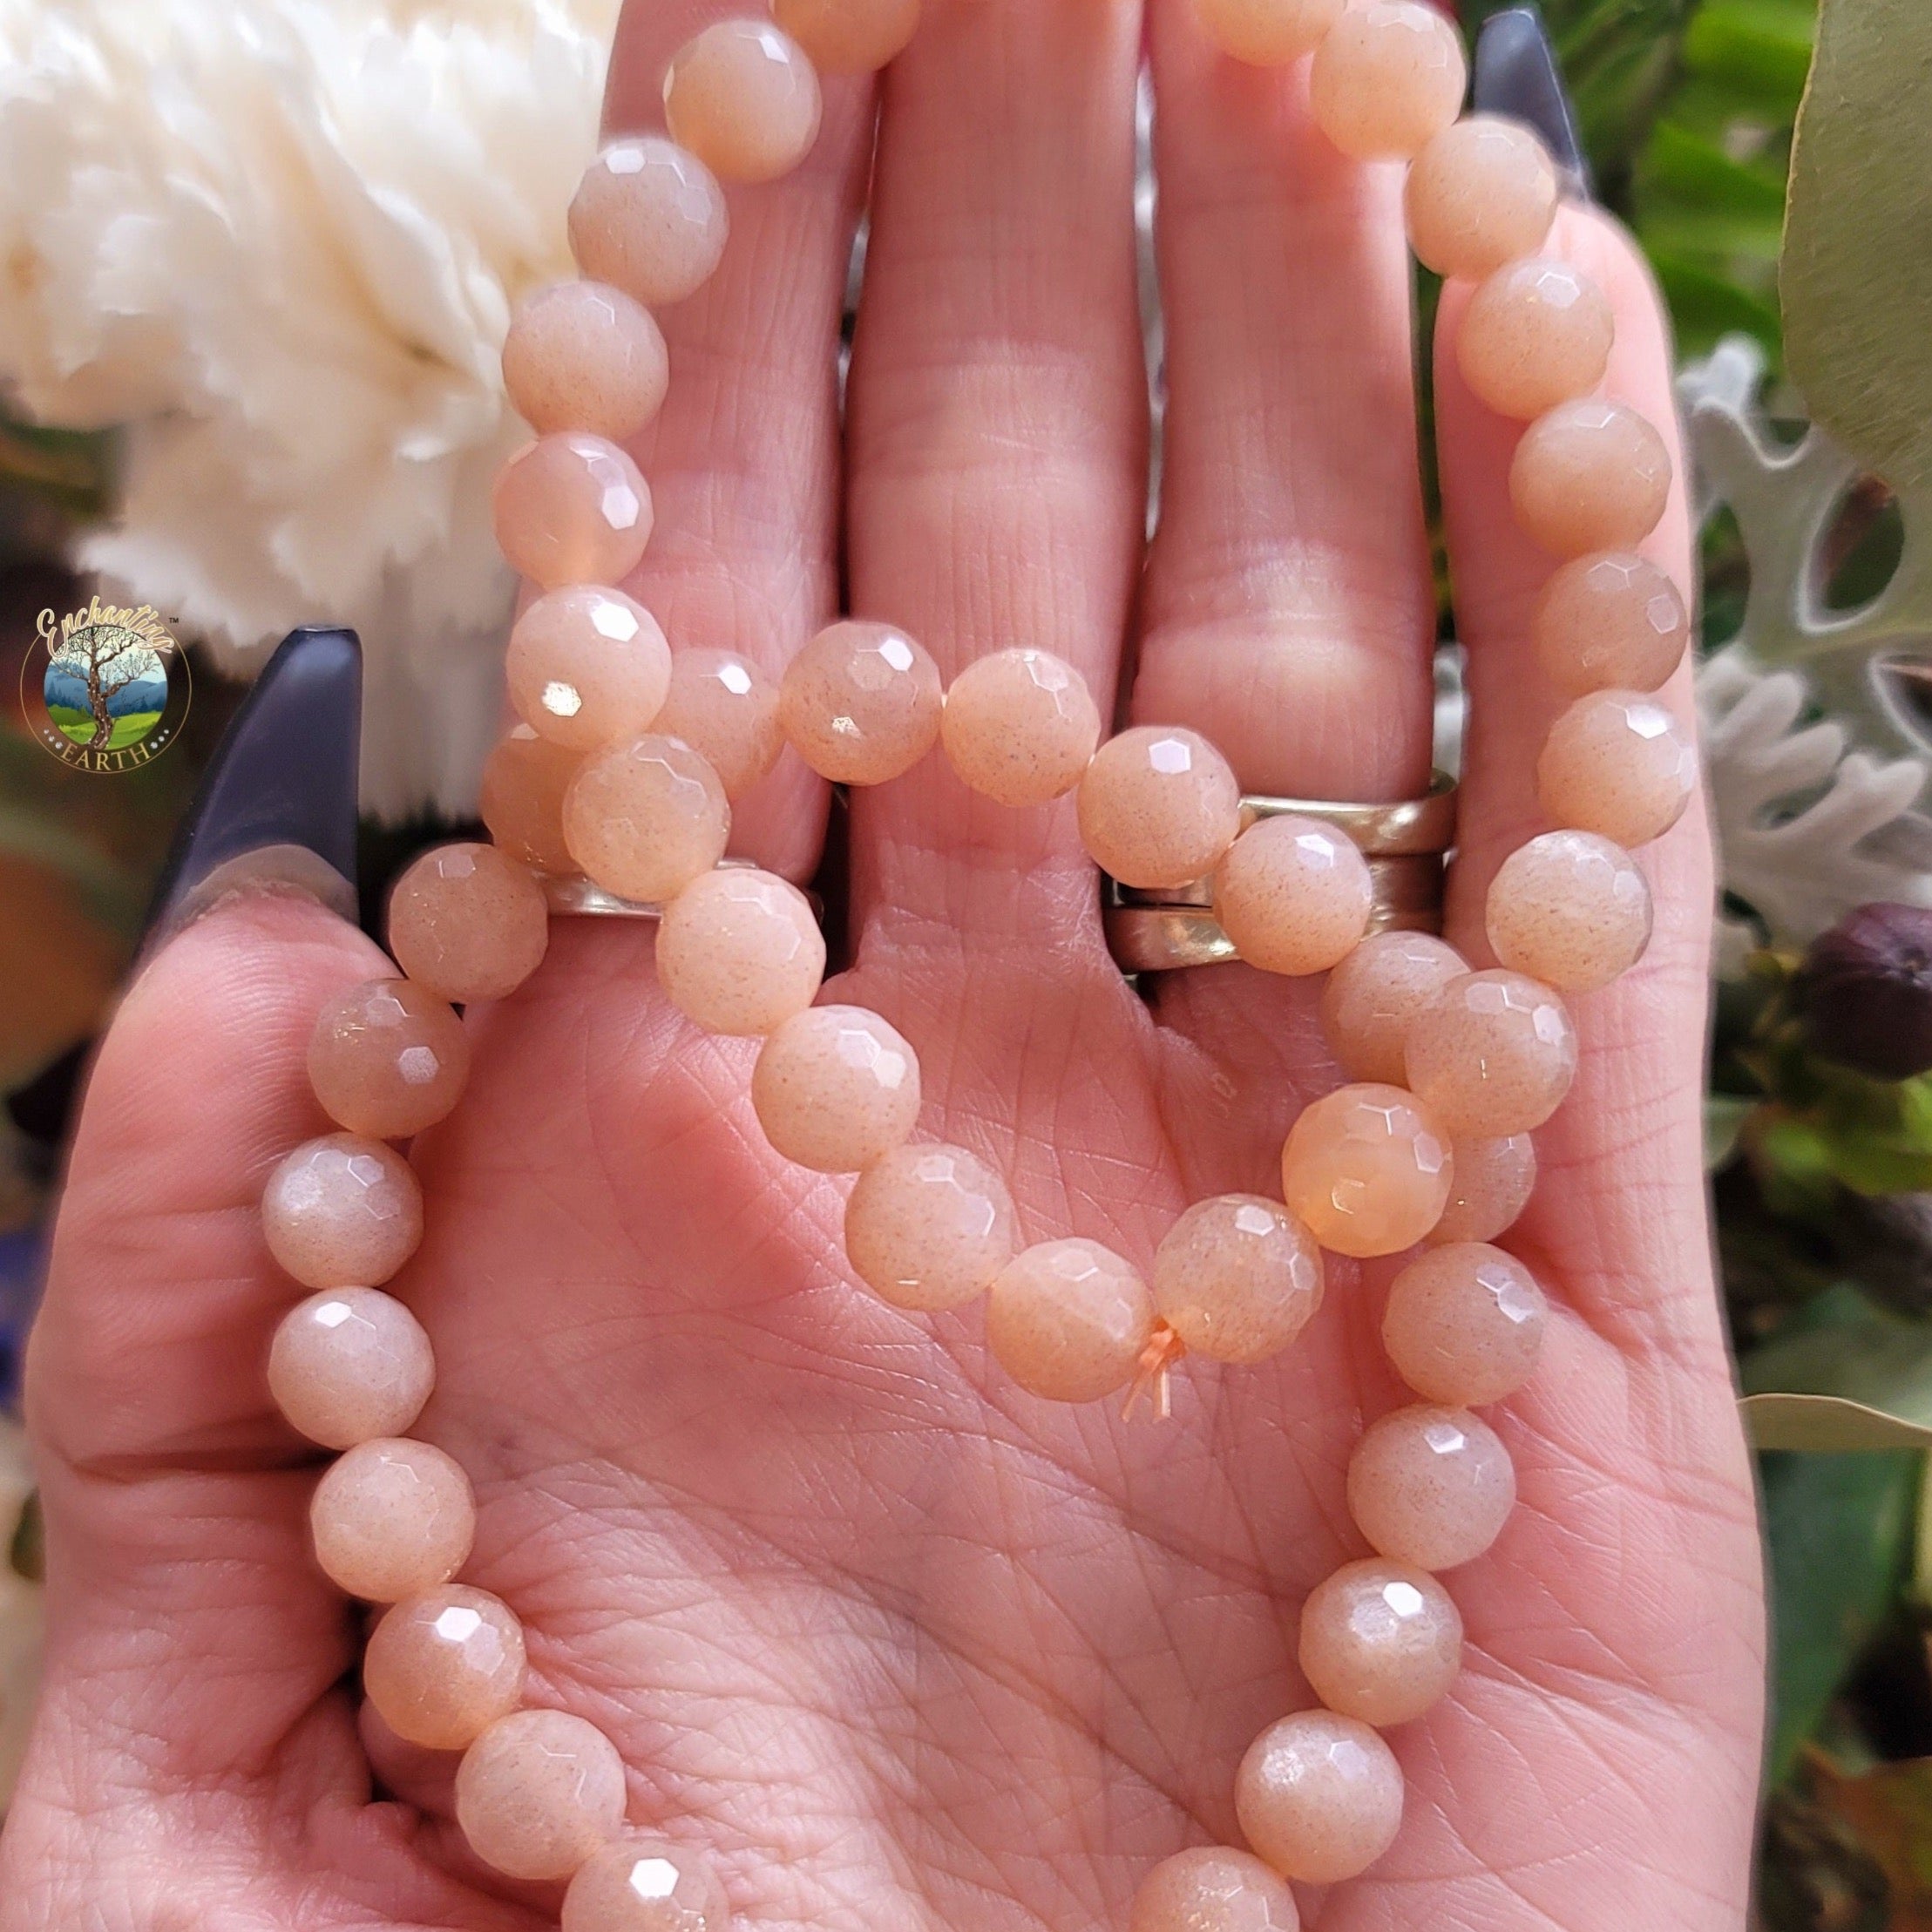 Peach Moonstone Faceted Bracelet for New Begginings, Artistic Expression, Creativity & Manifestation